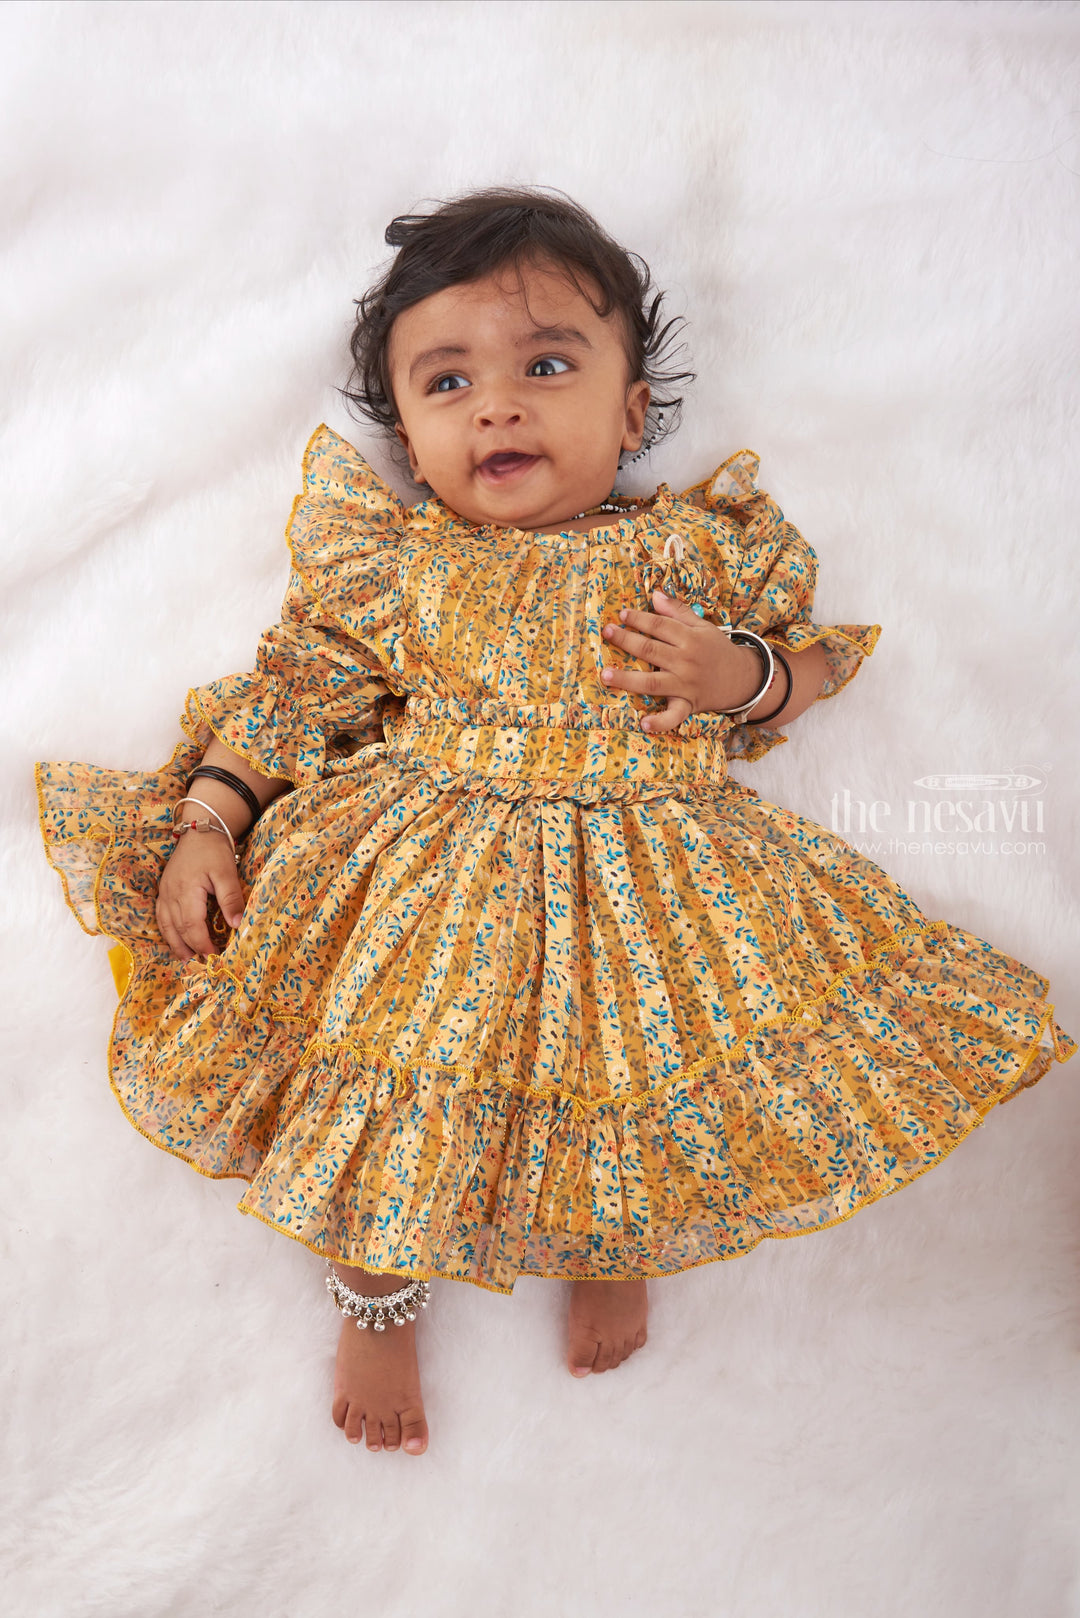 The Nesavu Baby Fancy Frock Floral Symphony Baby Frock in Earthy Tones - Adorable & Trendy Frocks for Little Ones Nesavu 14 (6M) / Yellow / Georgette BFJ477A-14 Adorable Frocks for Baby Girls | Festive and Traditional Dresses | The Nesavu